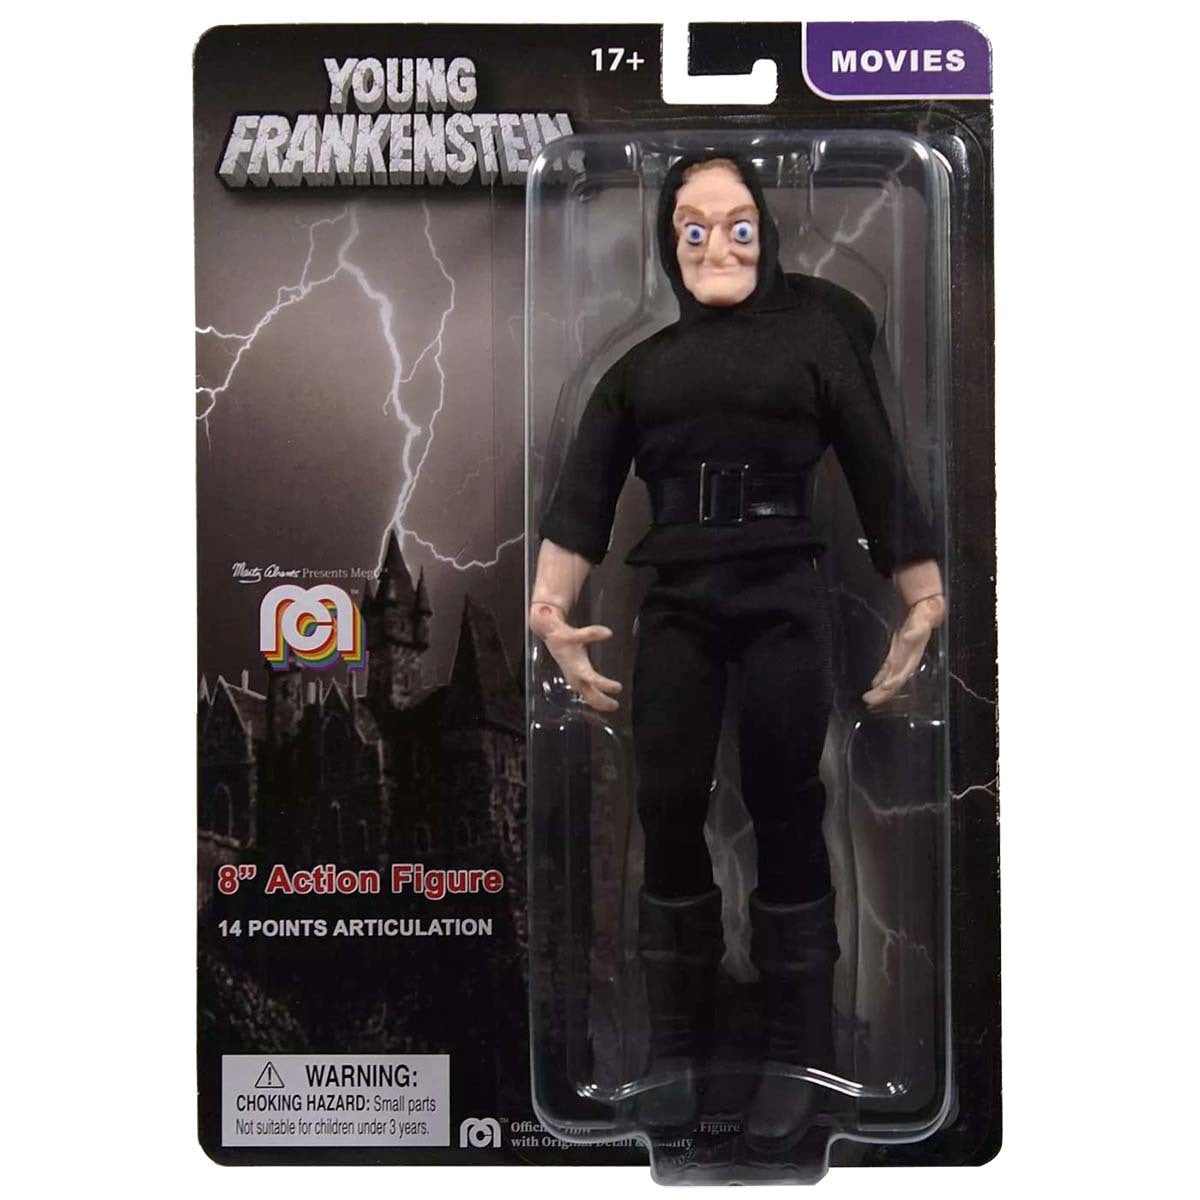 Mego Movies Action Figure - Young Frankenstein